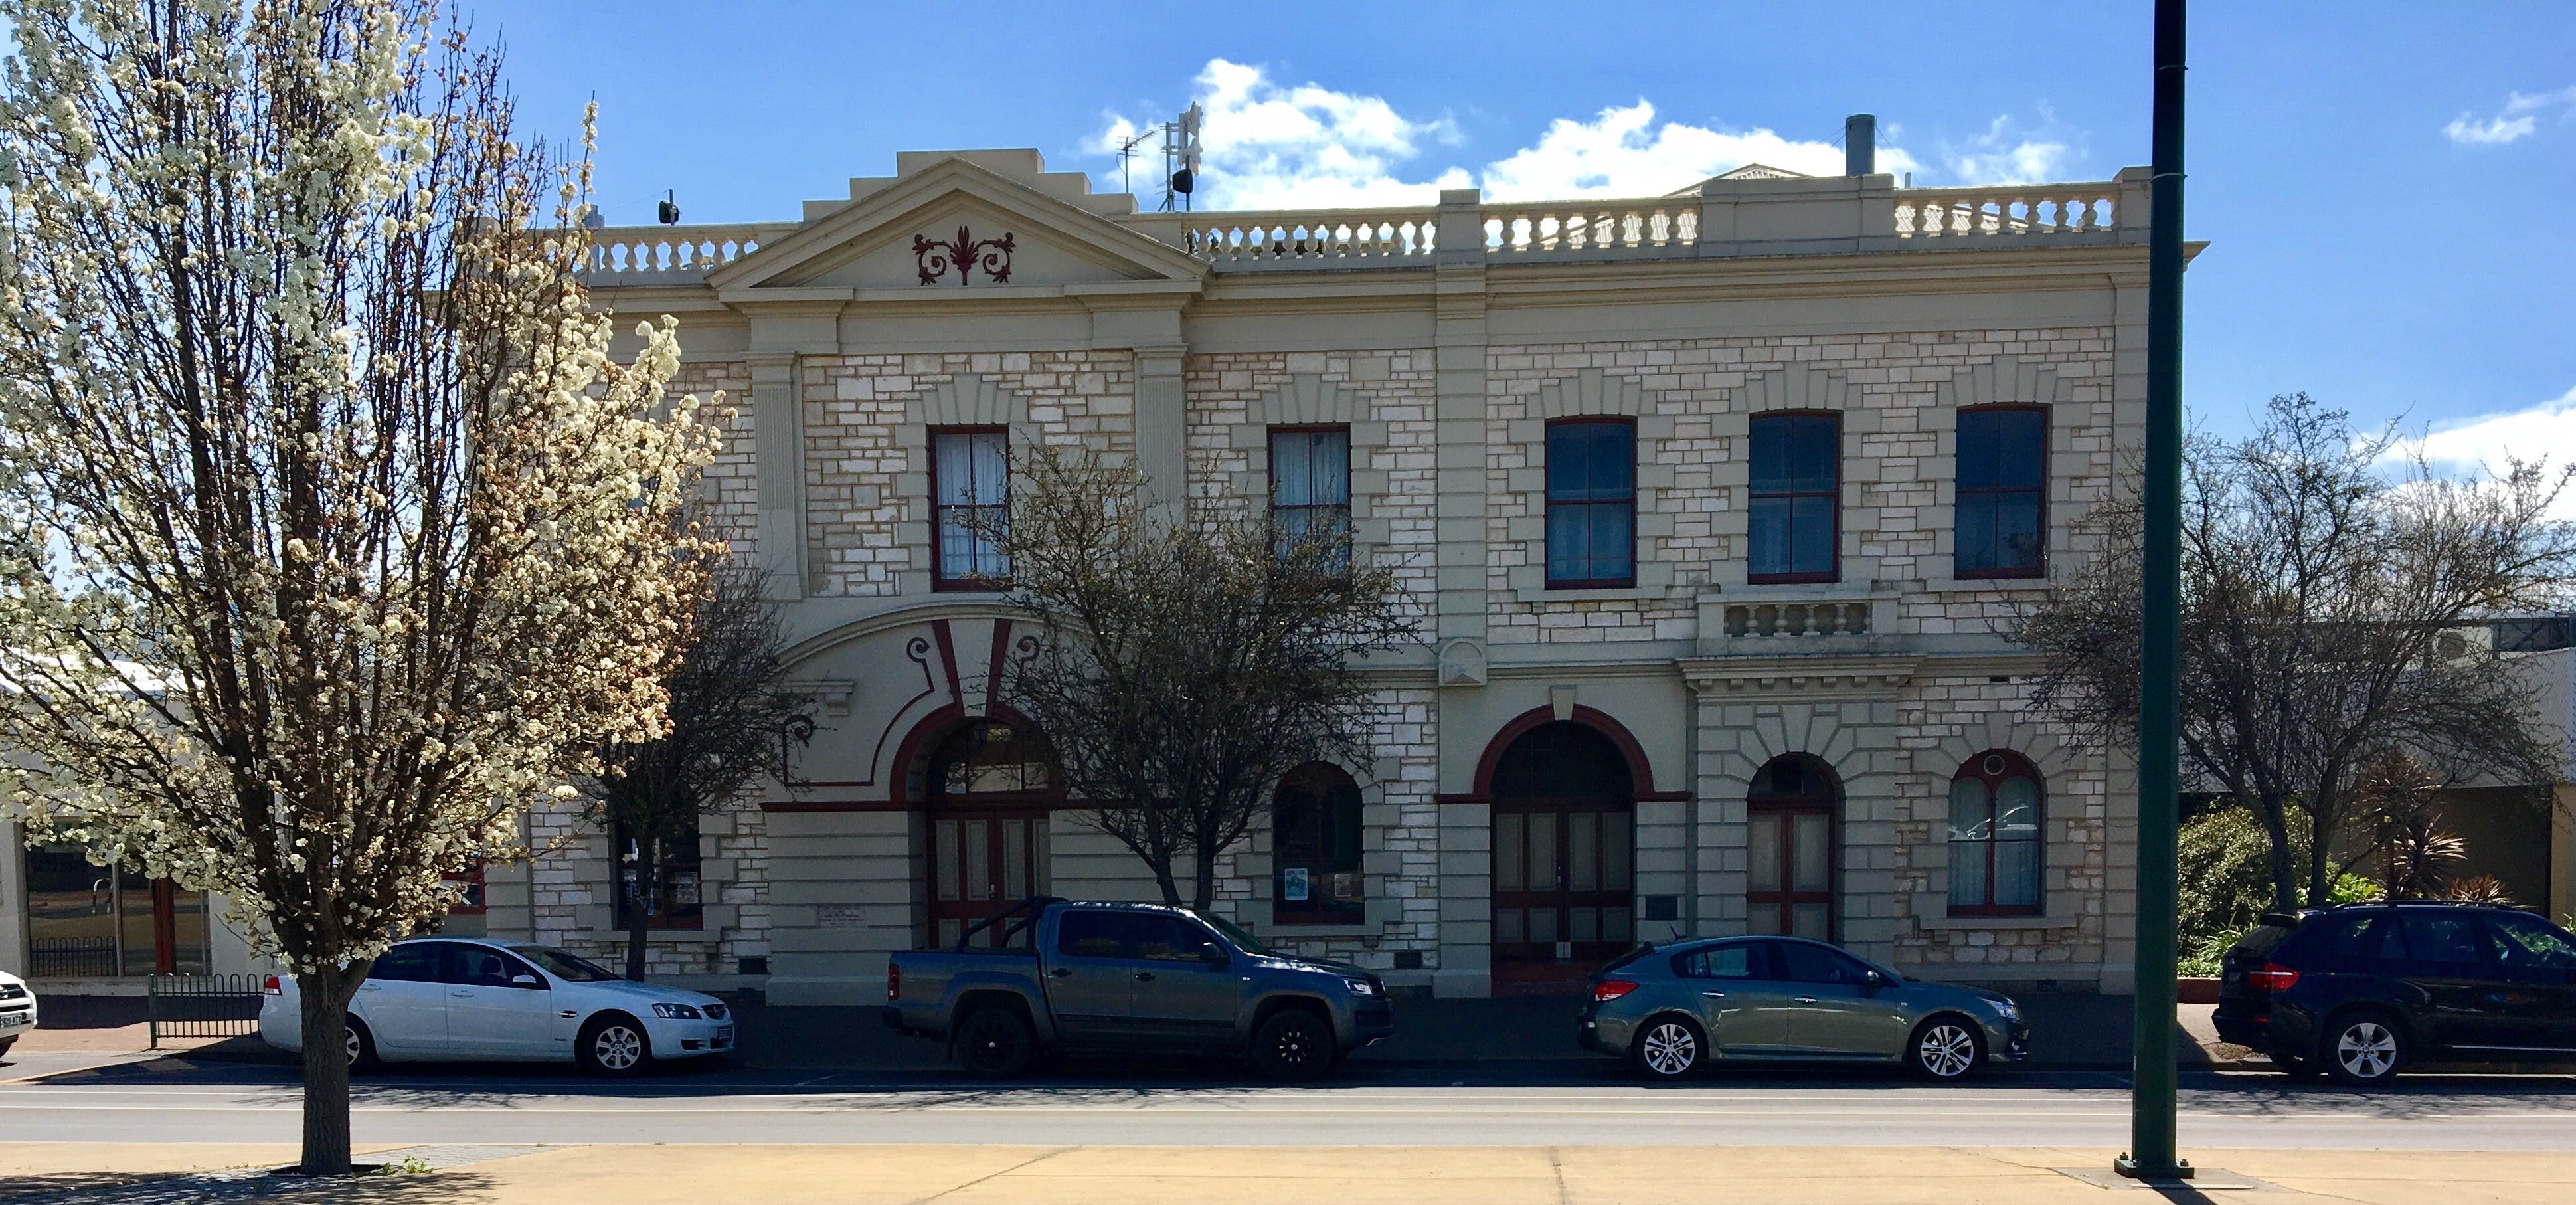 Naracoorte Town Hall - Attractions